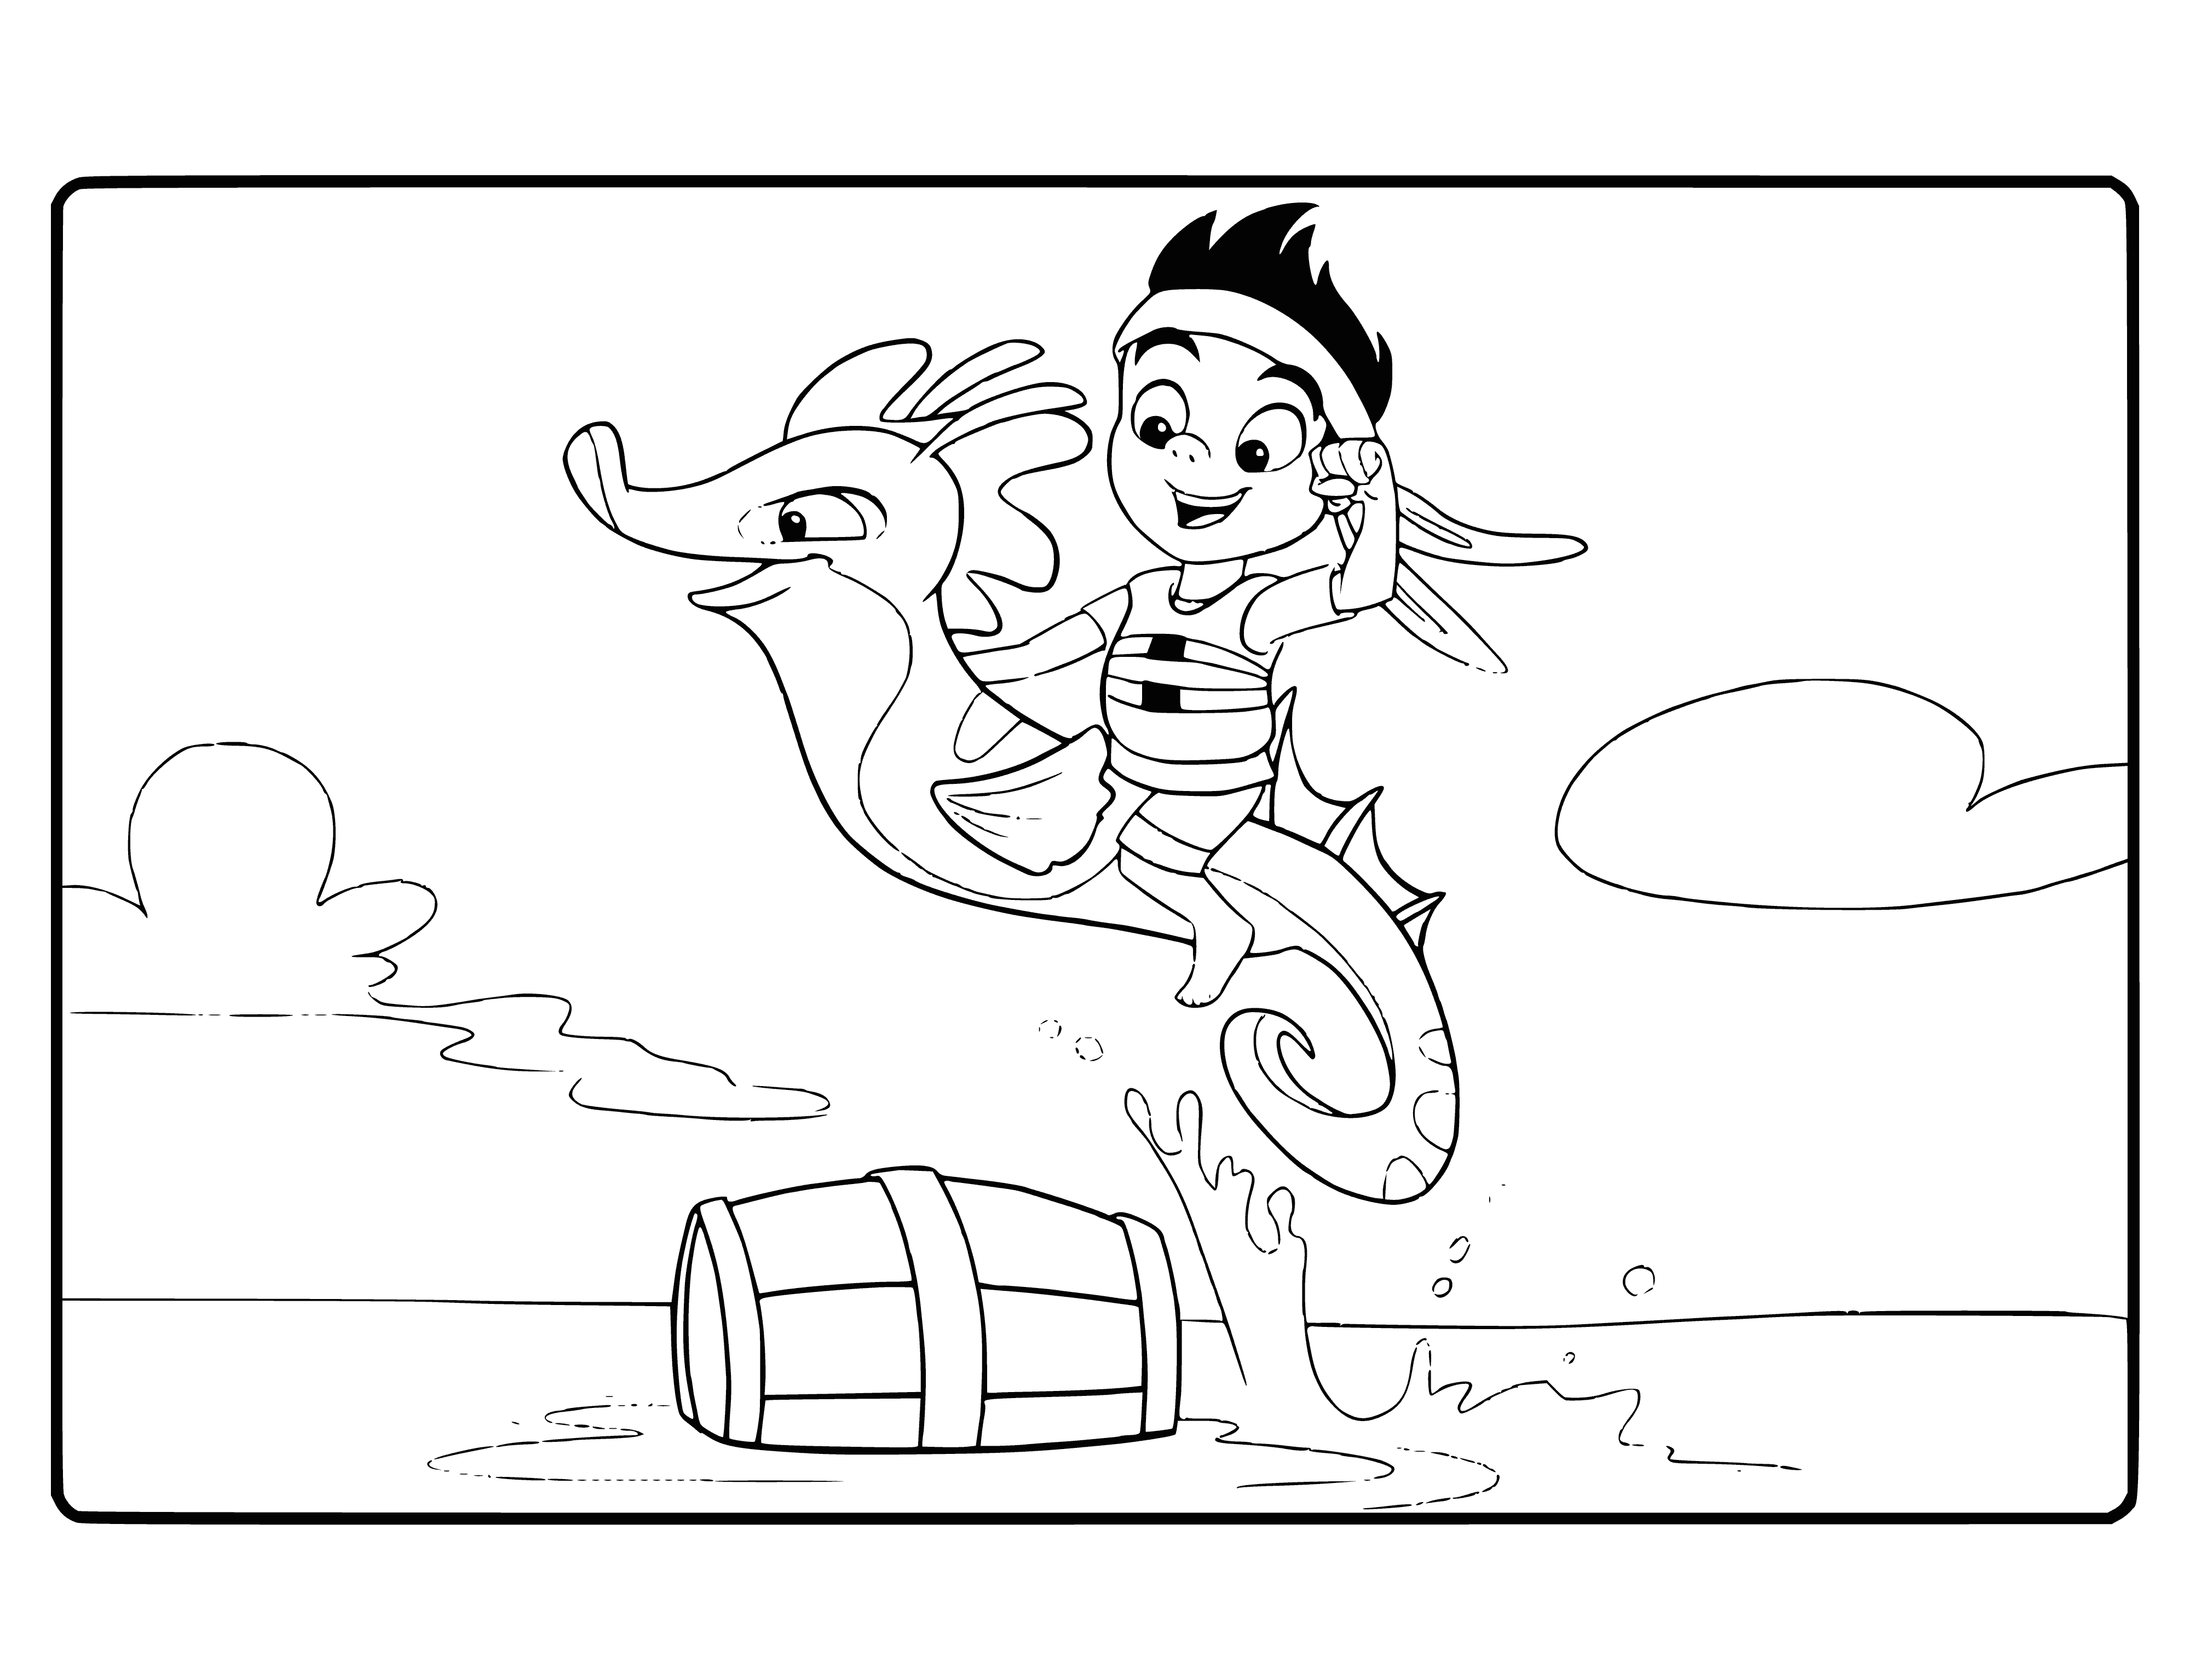 coloring page: Jake rides a seahorse on a Never Land Pirate ship. He wears a blue and white striped shirt, red bandana and holds a fishing rod. Near him are 3 purple and pink fish.